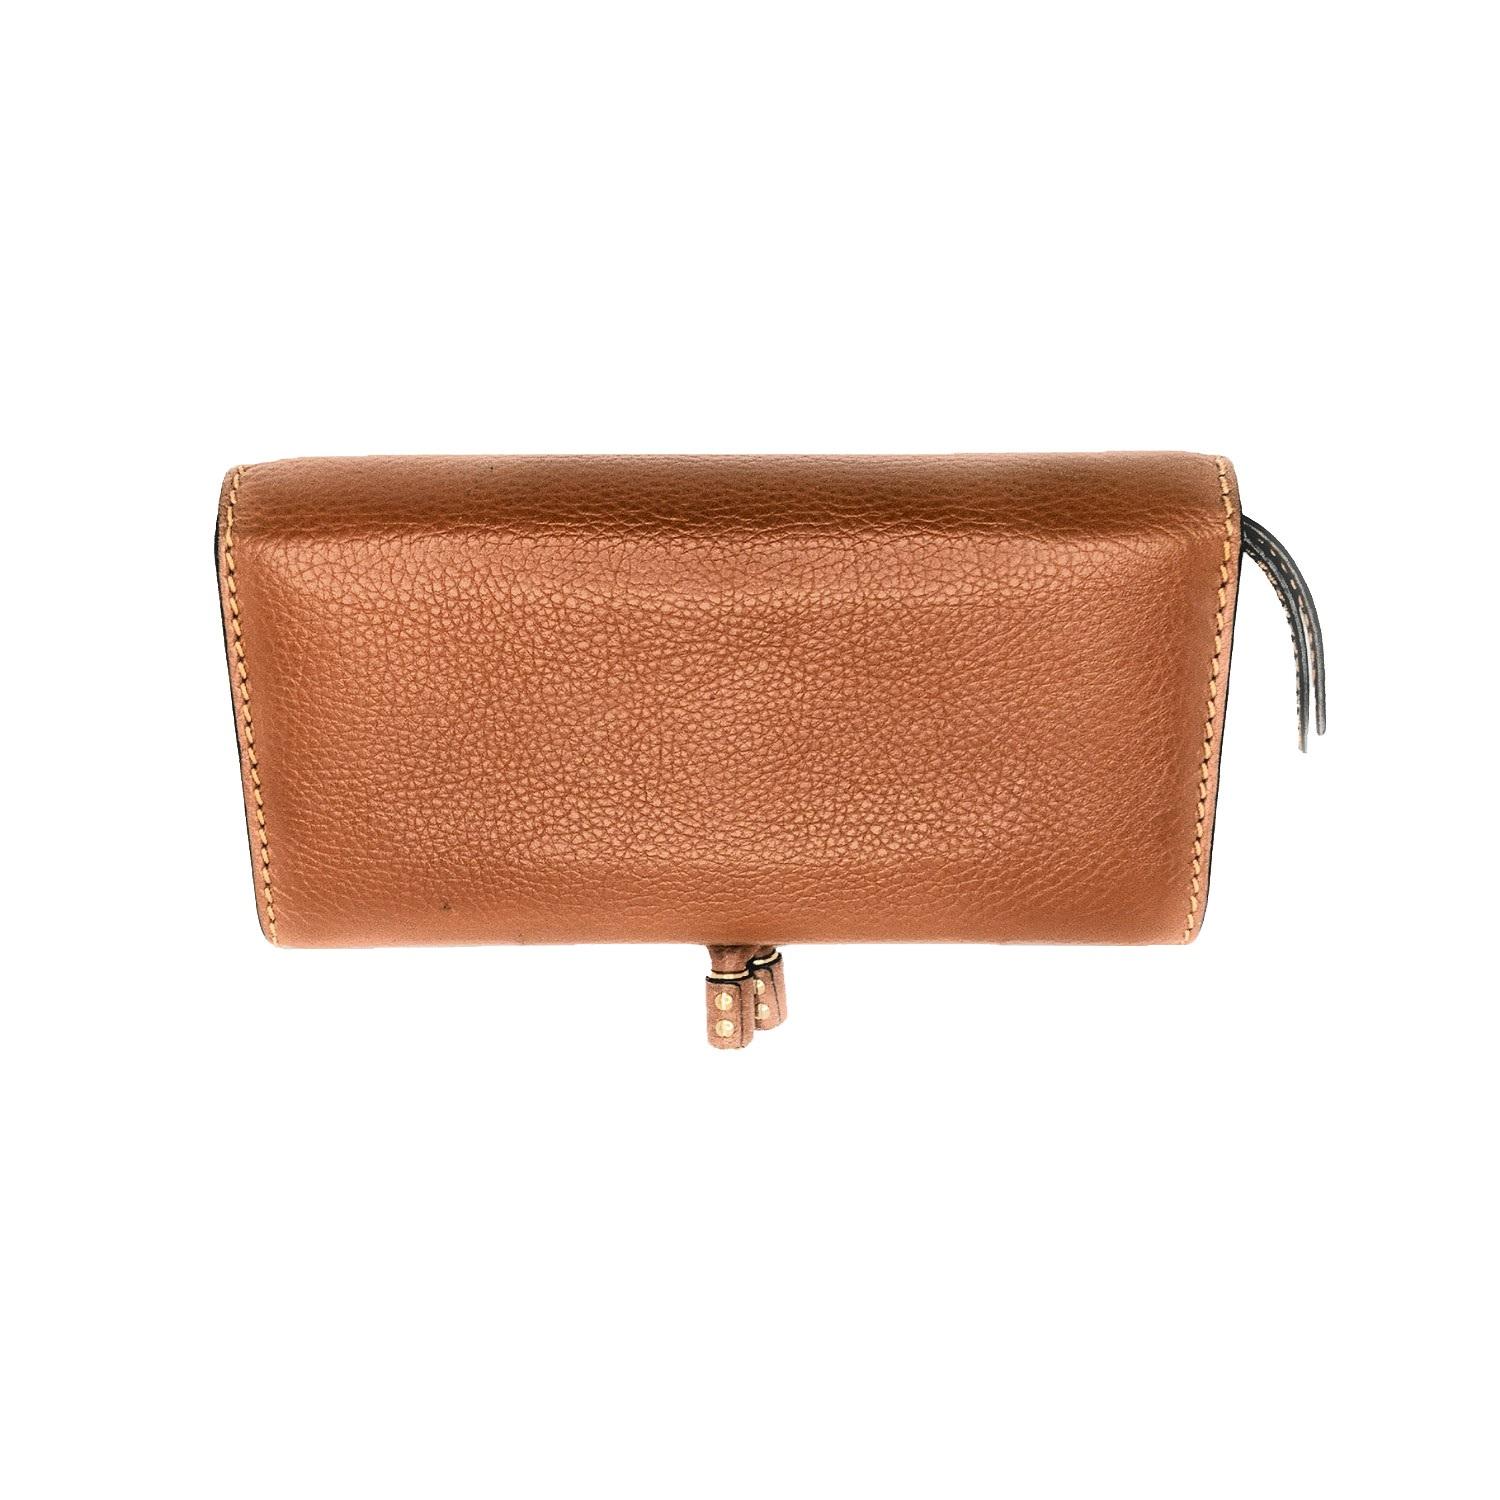 Tan leather Chloé Marcie continental wallet with gold-tone hardware, beige leather lining, three interior compartments; one with zip closure, single slit pocket at interior, twelve card slots and snap closure at front flap. Retail price is